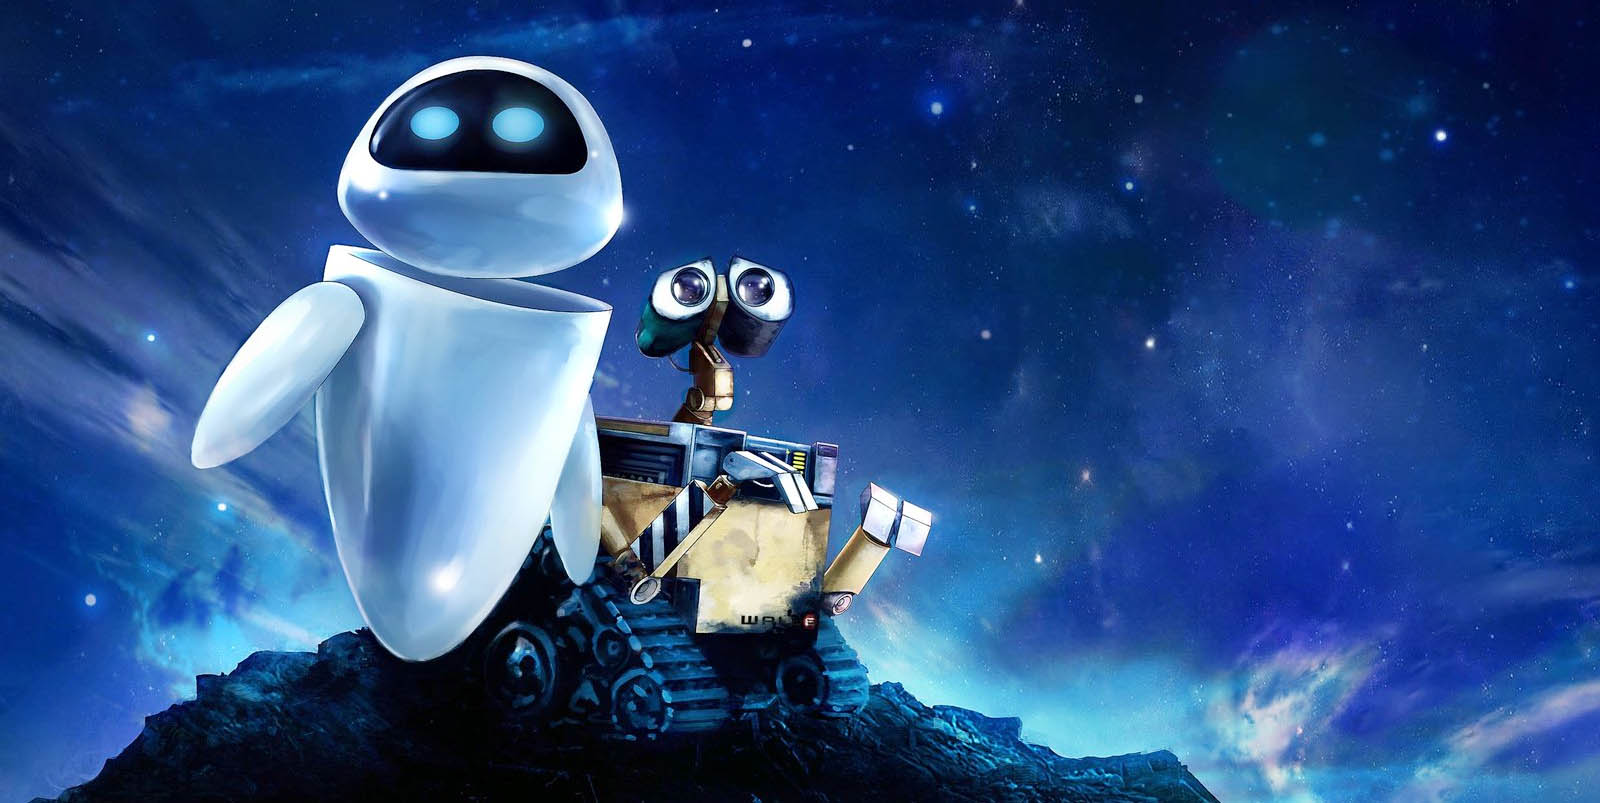 Wall-E, one of the best actors who ever lived, comes to life